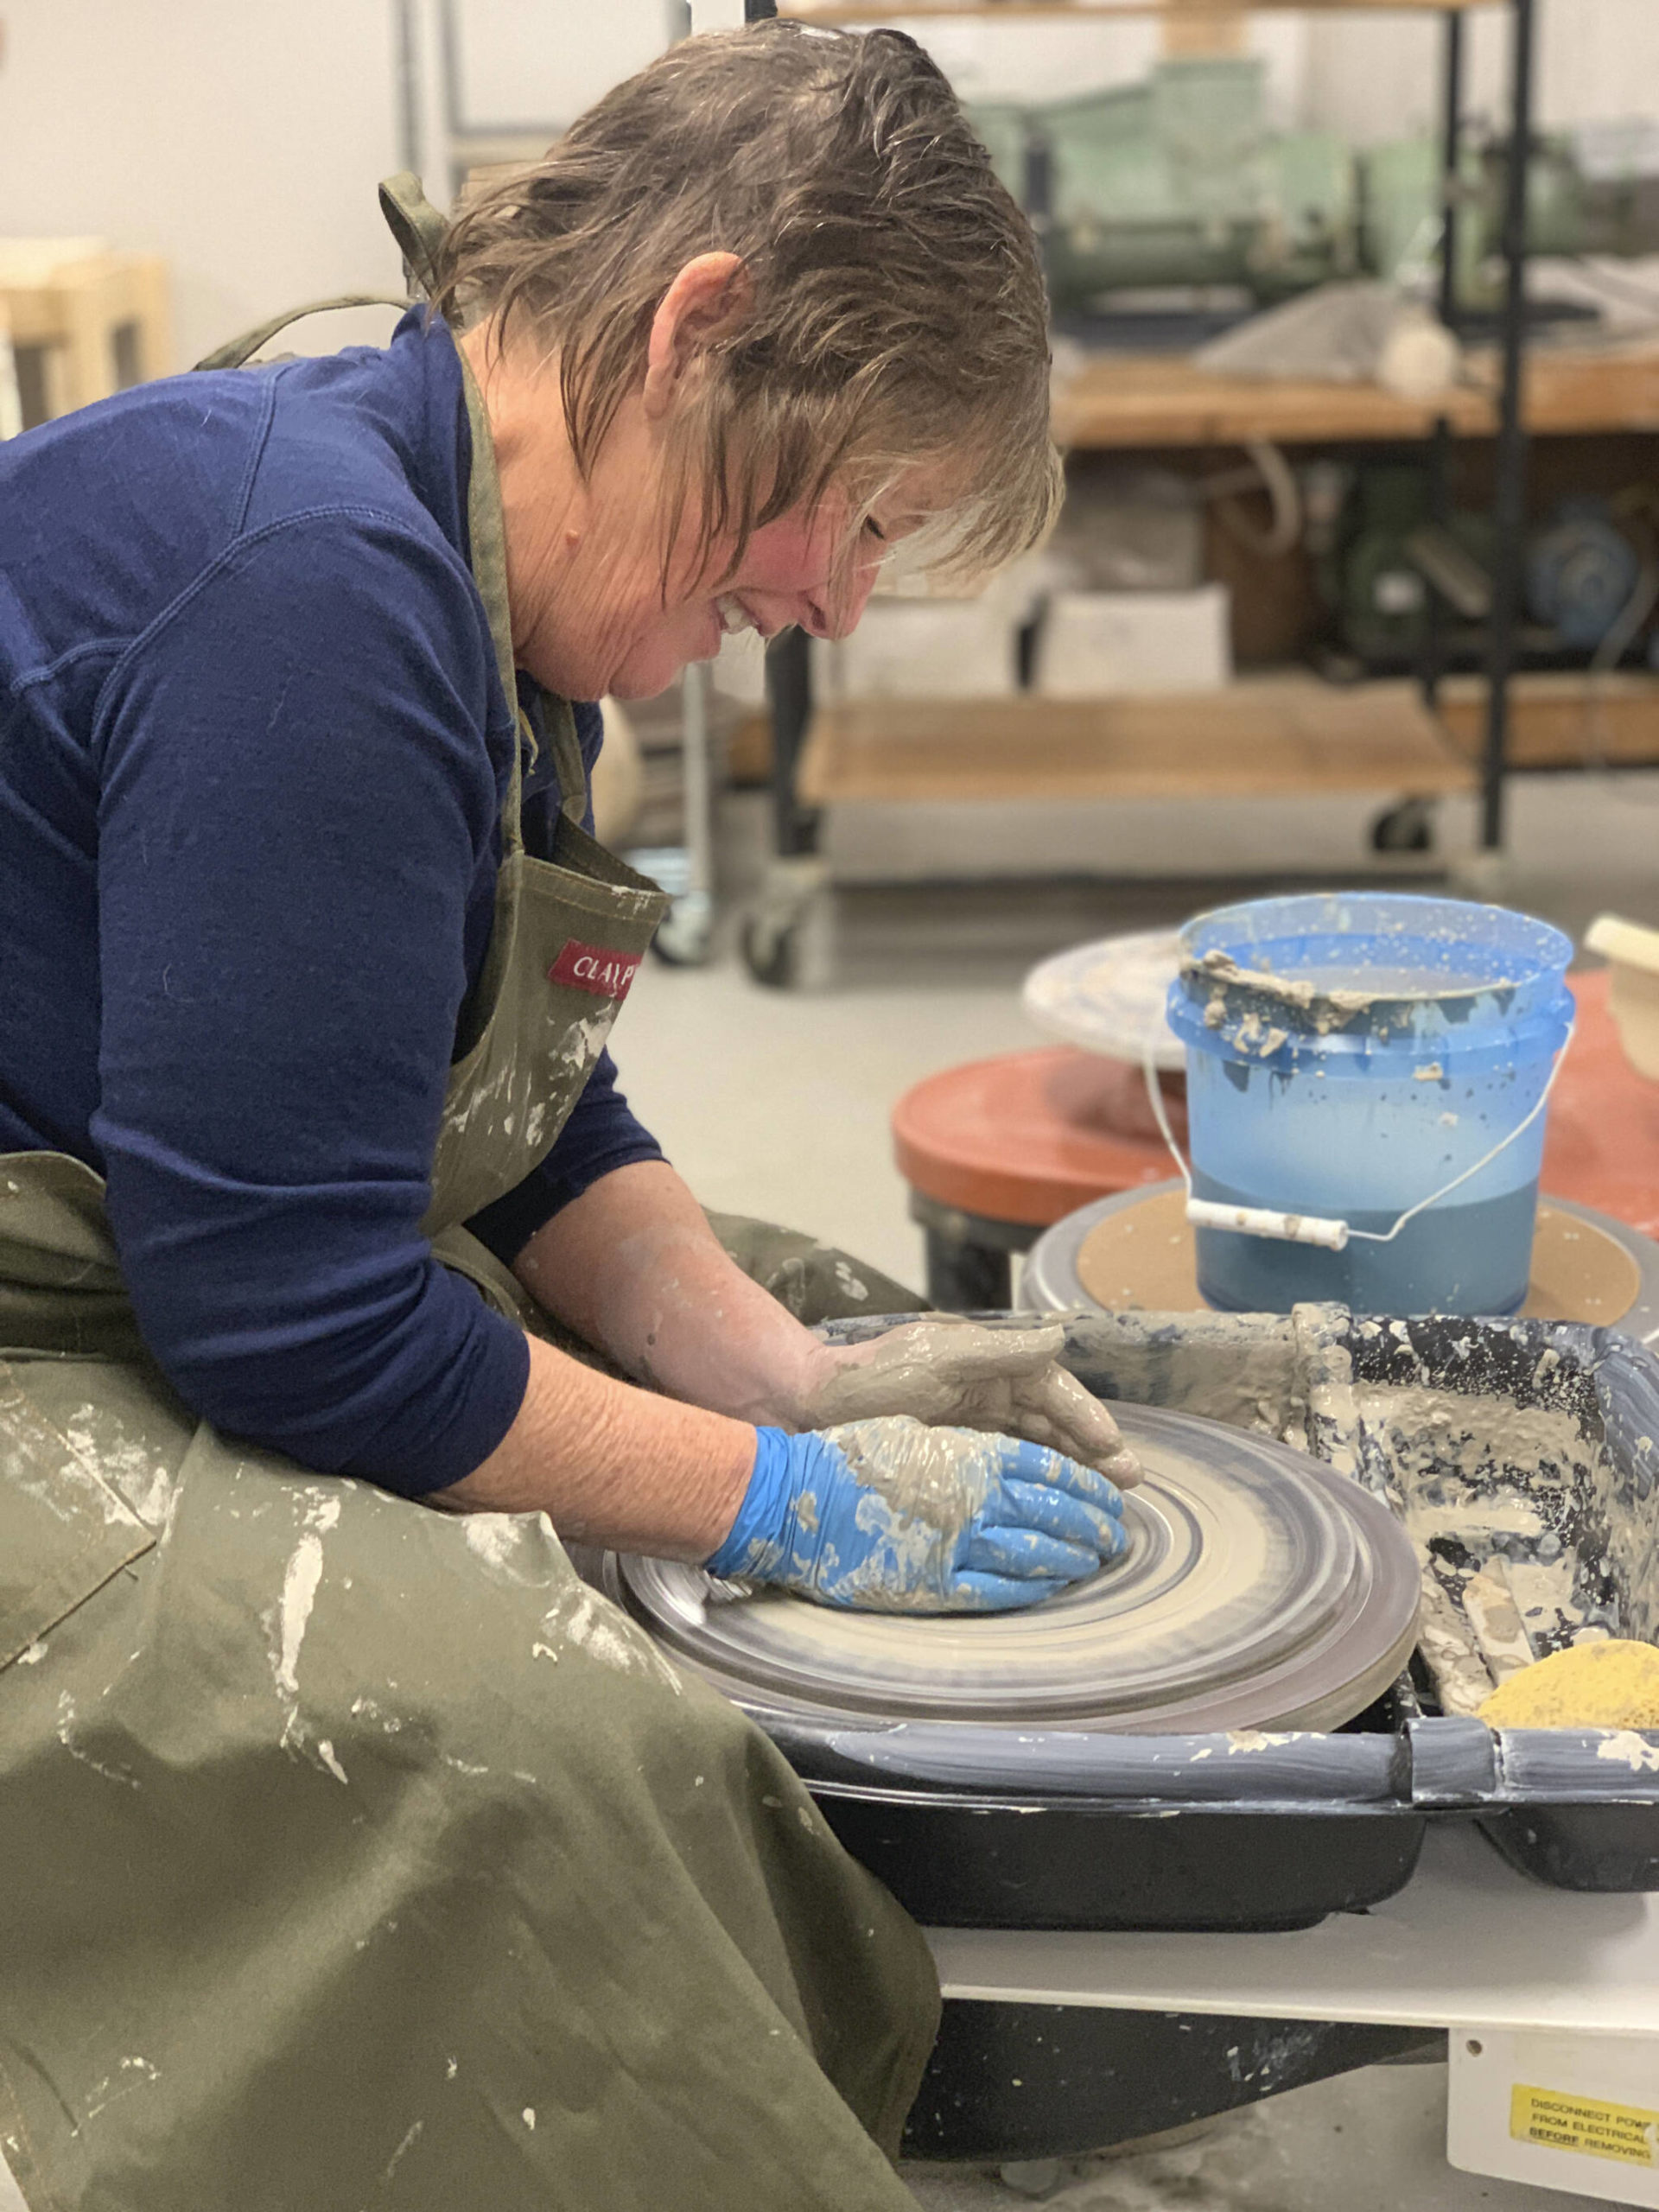 Peggy Paver uses a pottery wheel on Nov. 3, 2022, at the Homer Council on the Art's new ceramics studio in Homer, Alaska. (Photo provided)